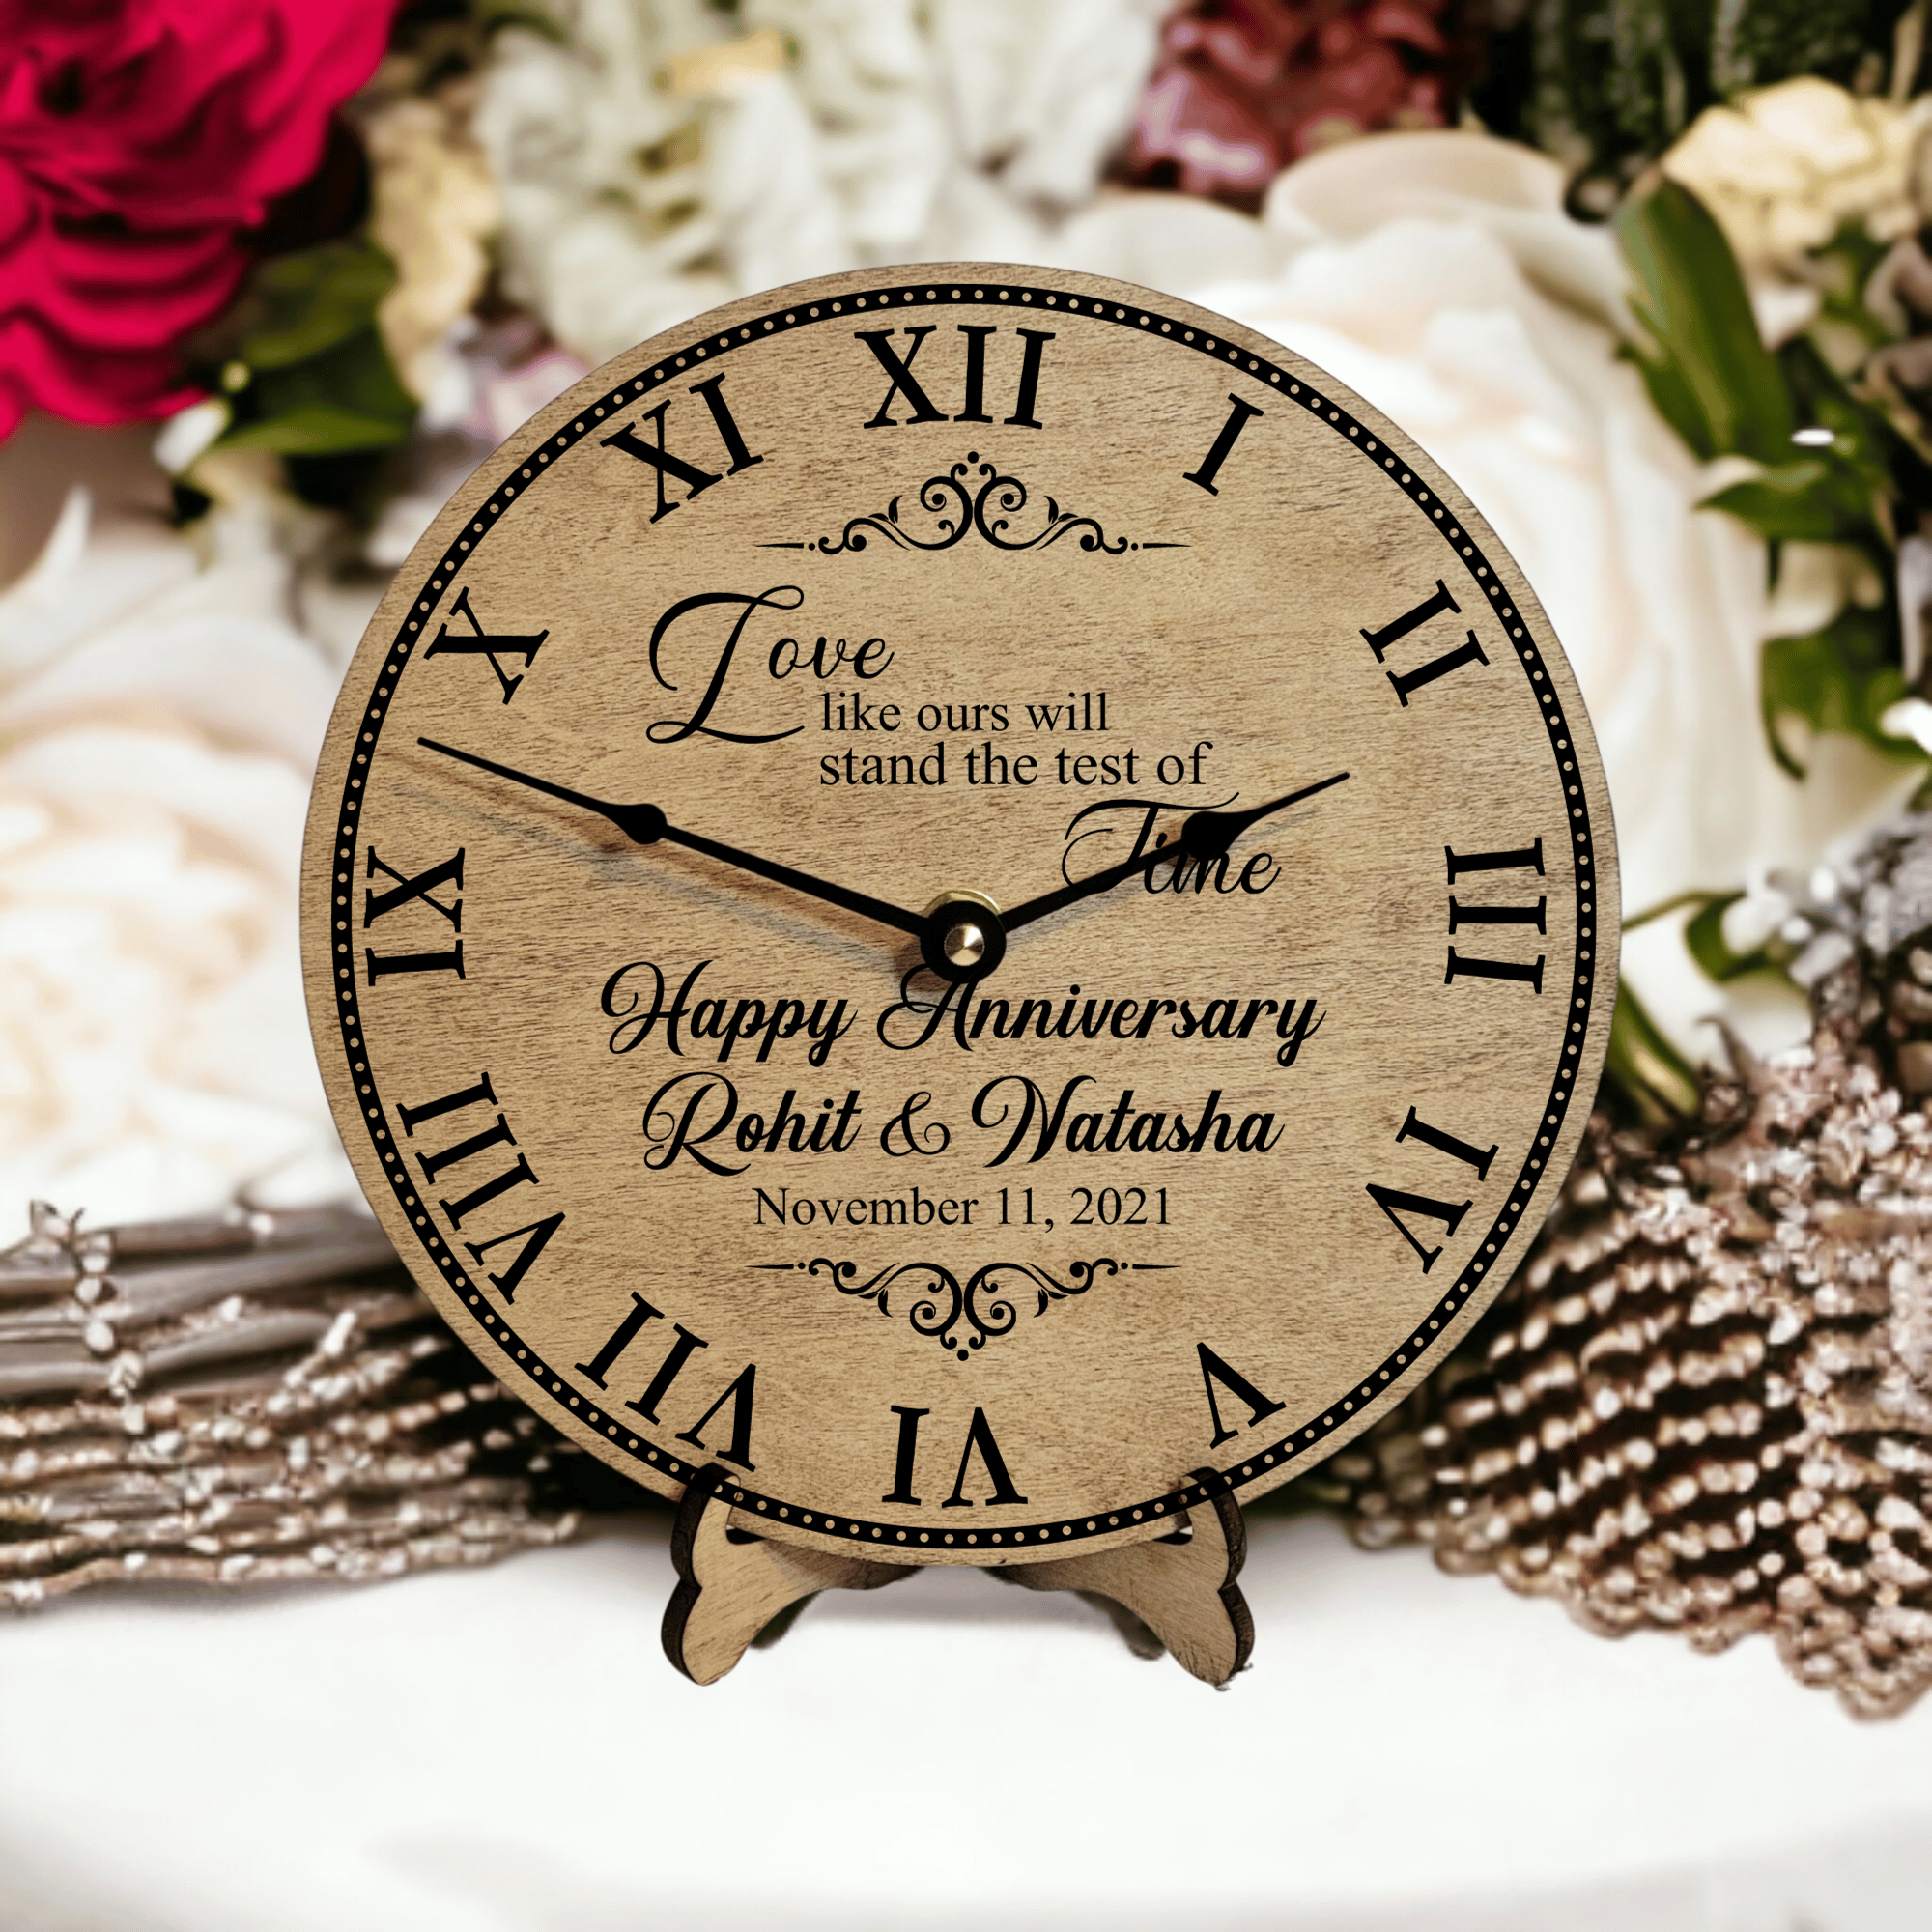 Love Like Ours Will Stand The Test of Time Wedding Anniversary Clock